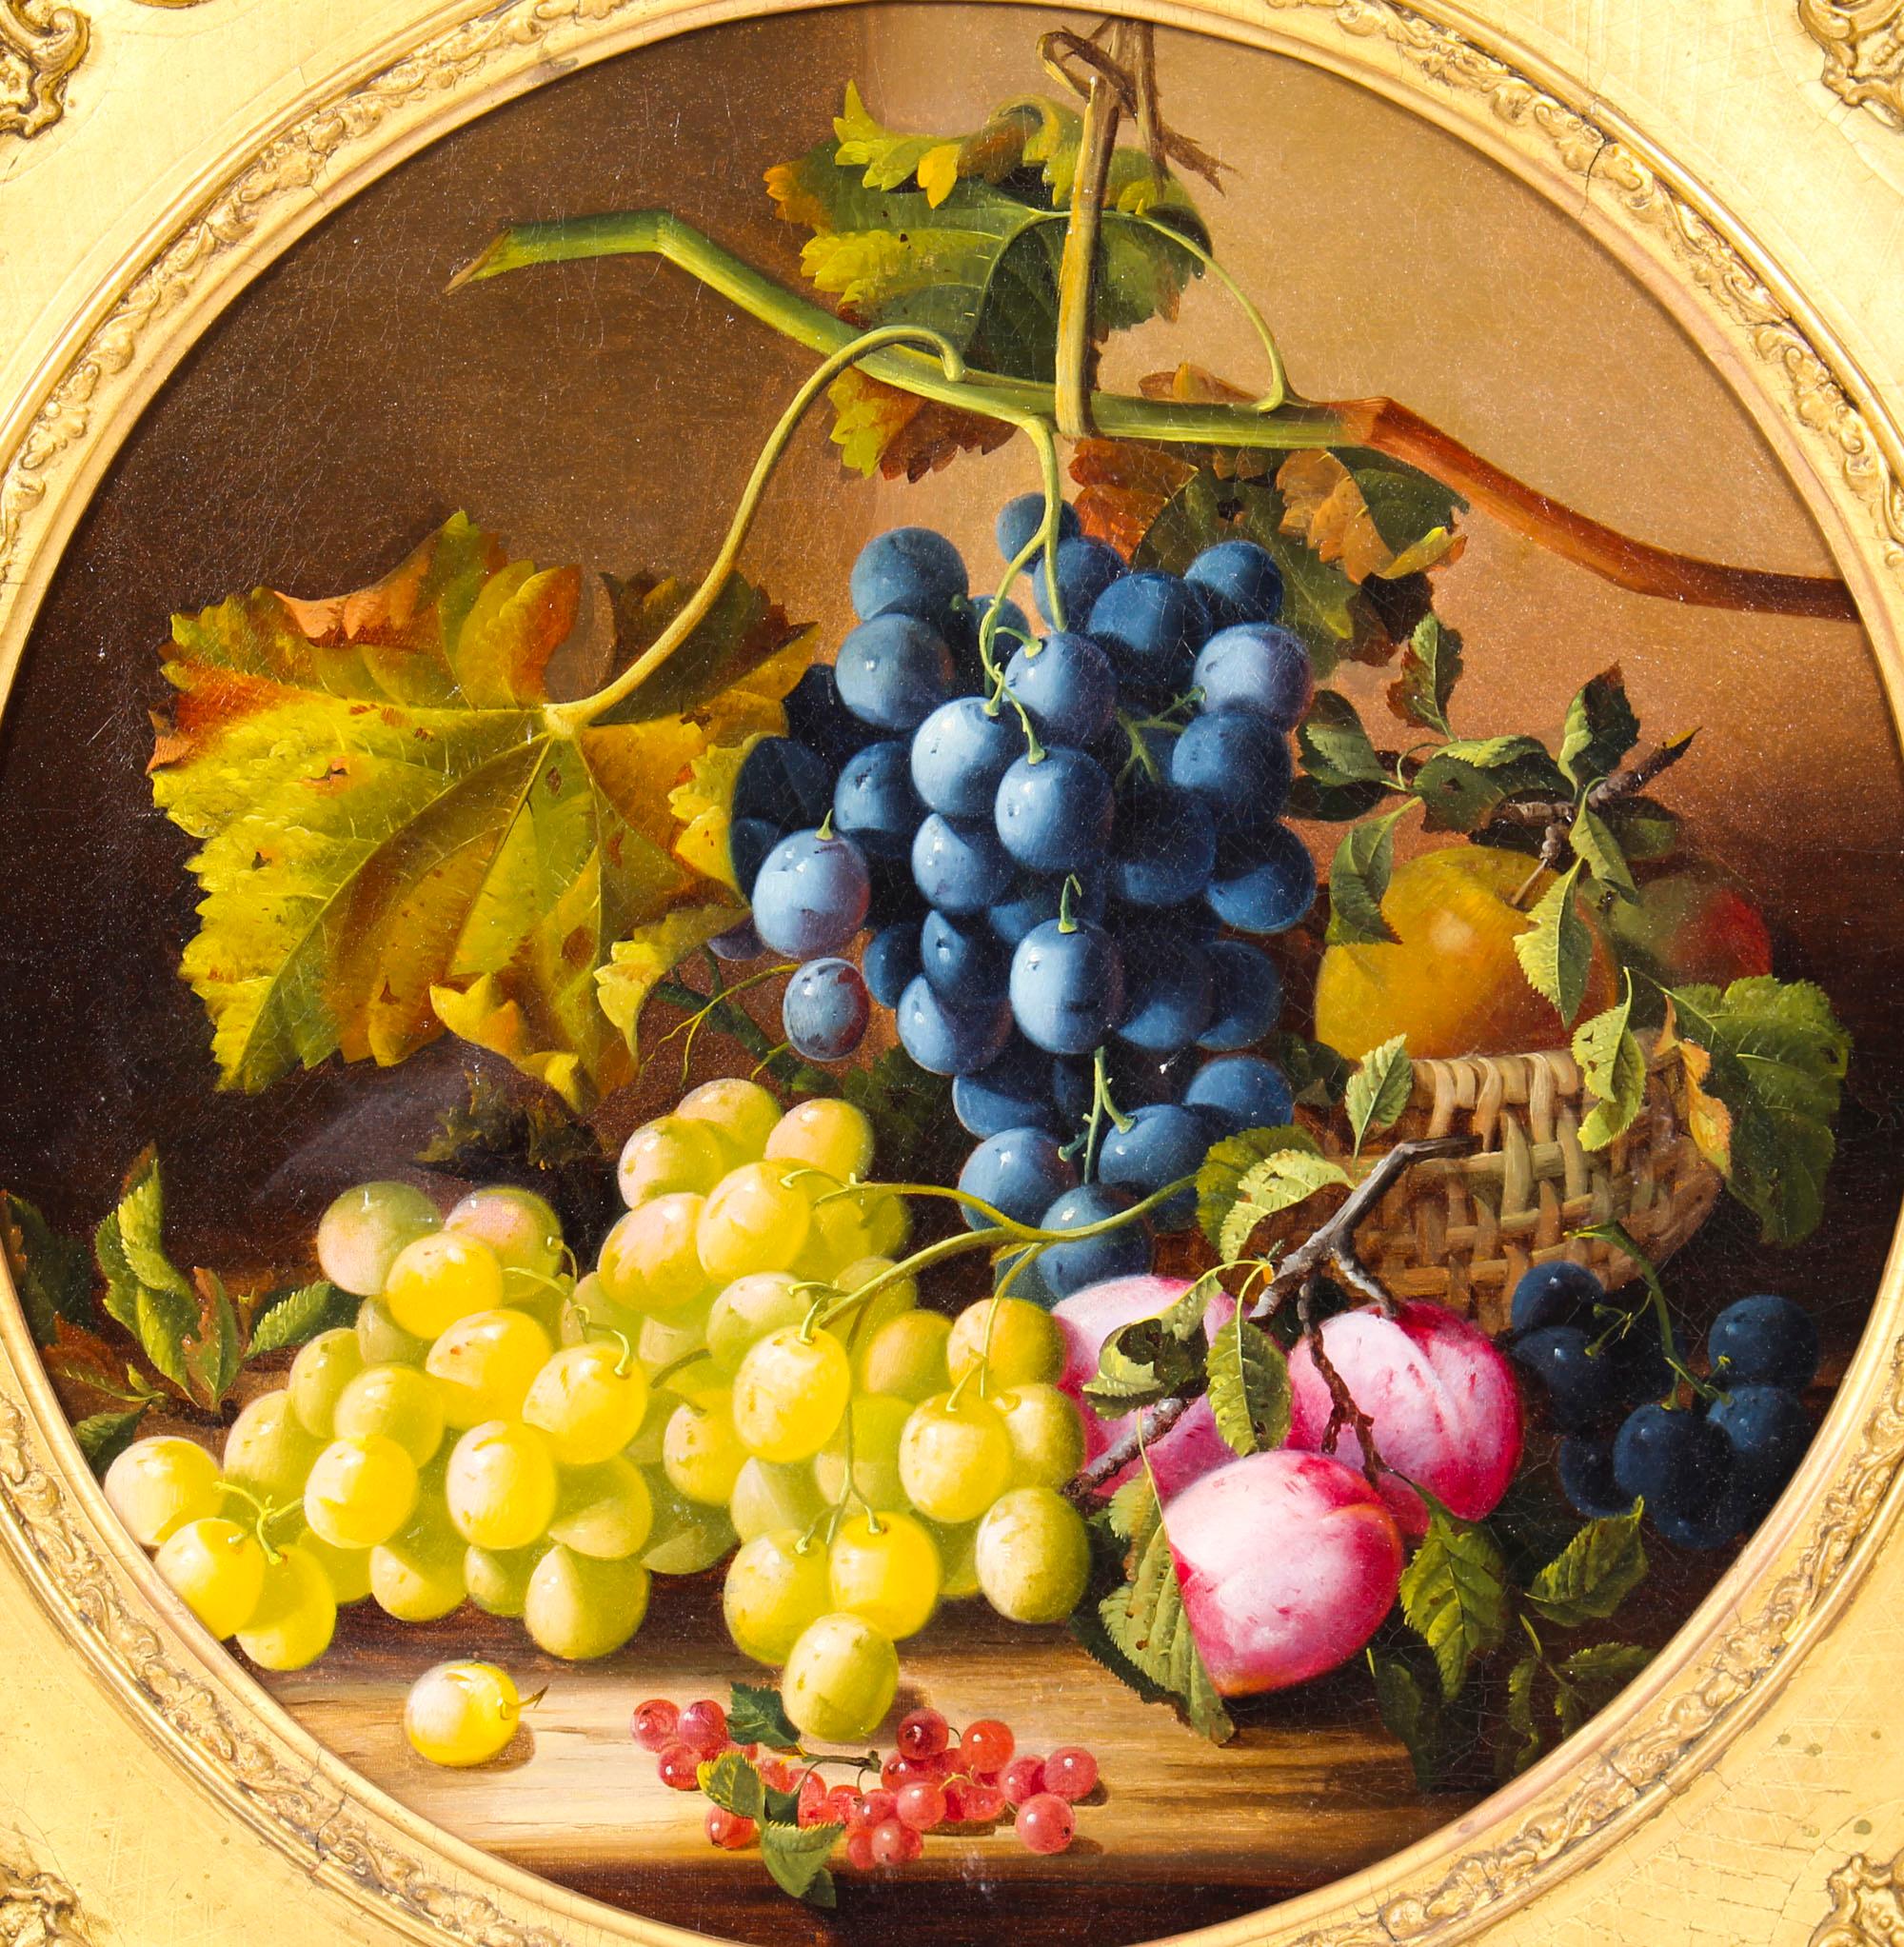 This is a truly magnificent antique Victorian still life oil on canvas painting titled 'A Fruit Piece' and attributed to the British female artist, Maria Margitson (1832-1896), and circa 1870 in date. 

This stunning still life is circular in